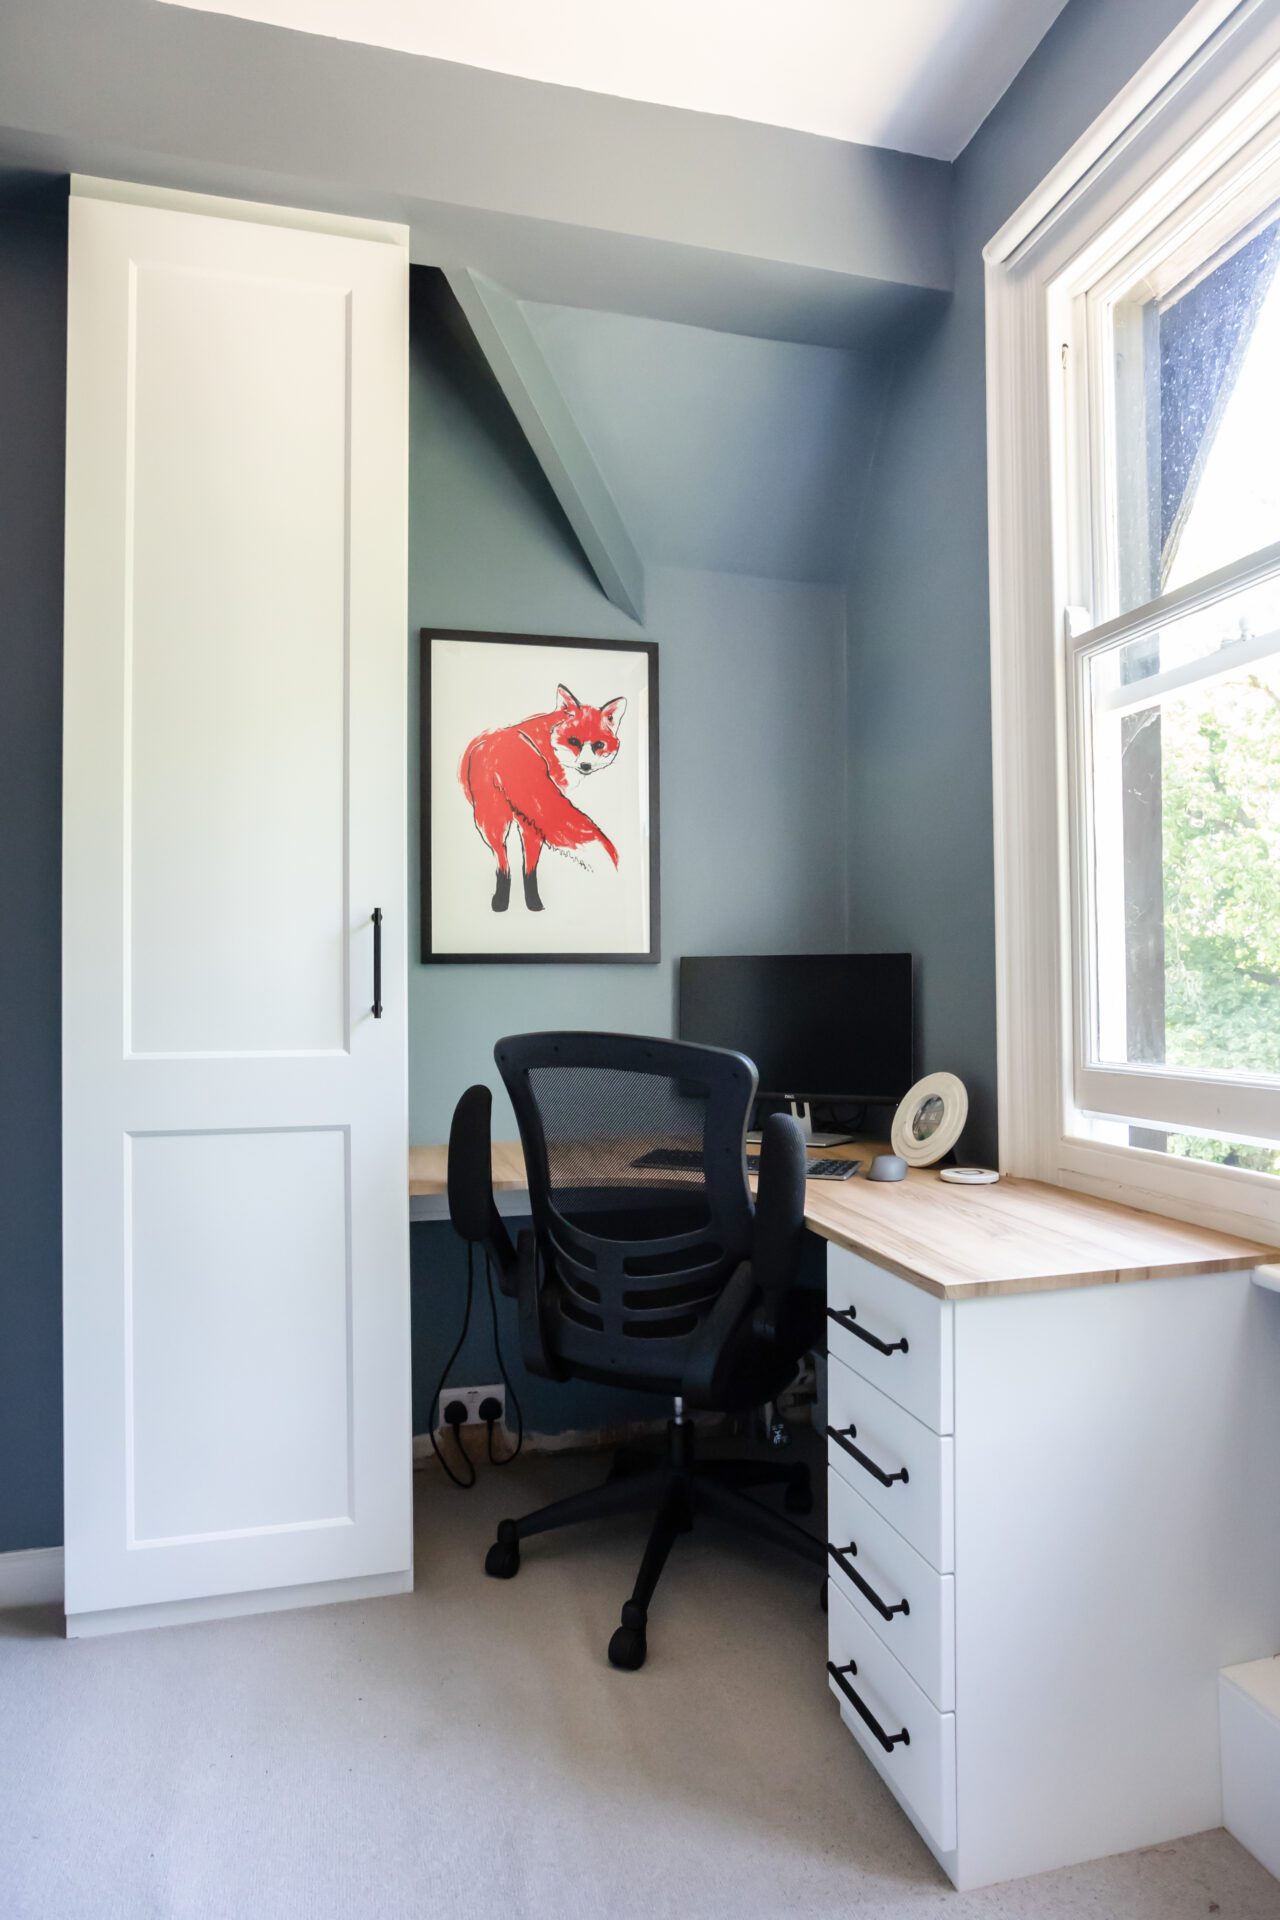 Image of a home office desk, drawers and cupboard